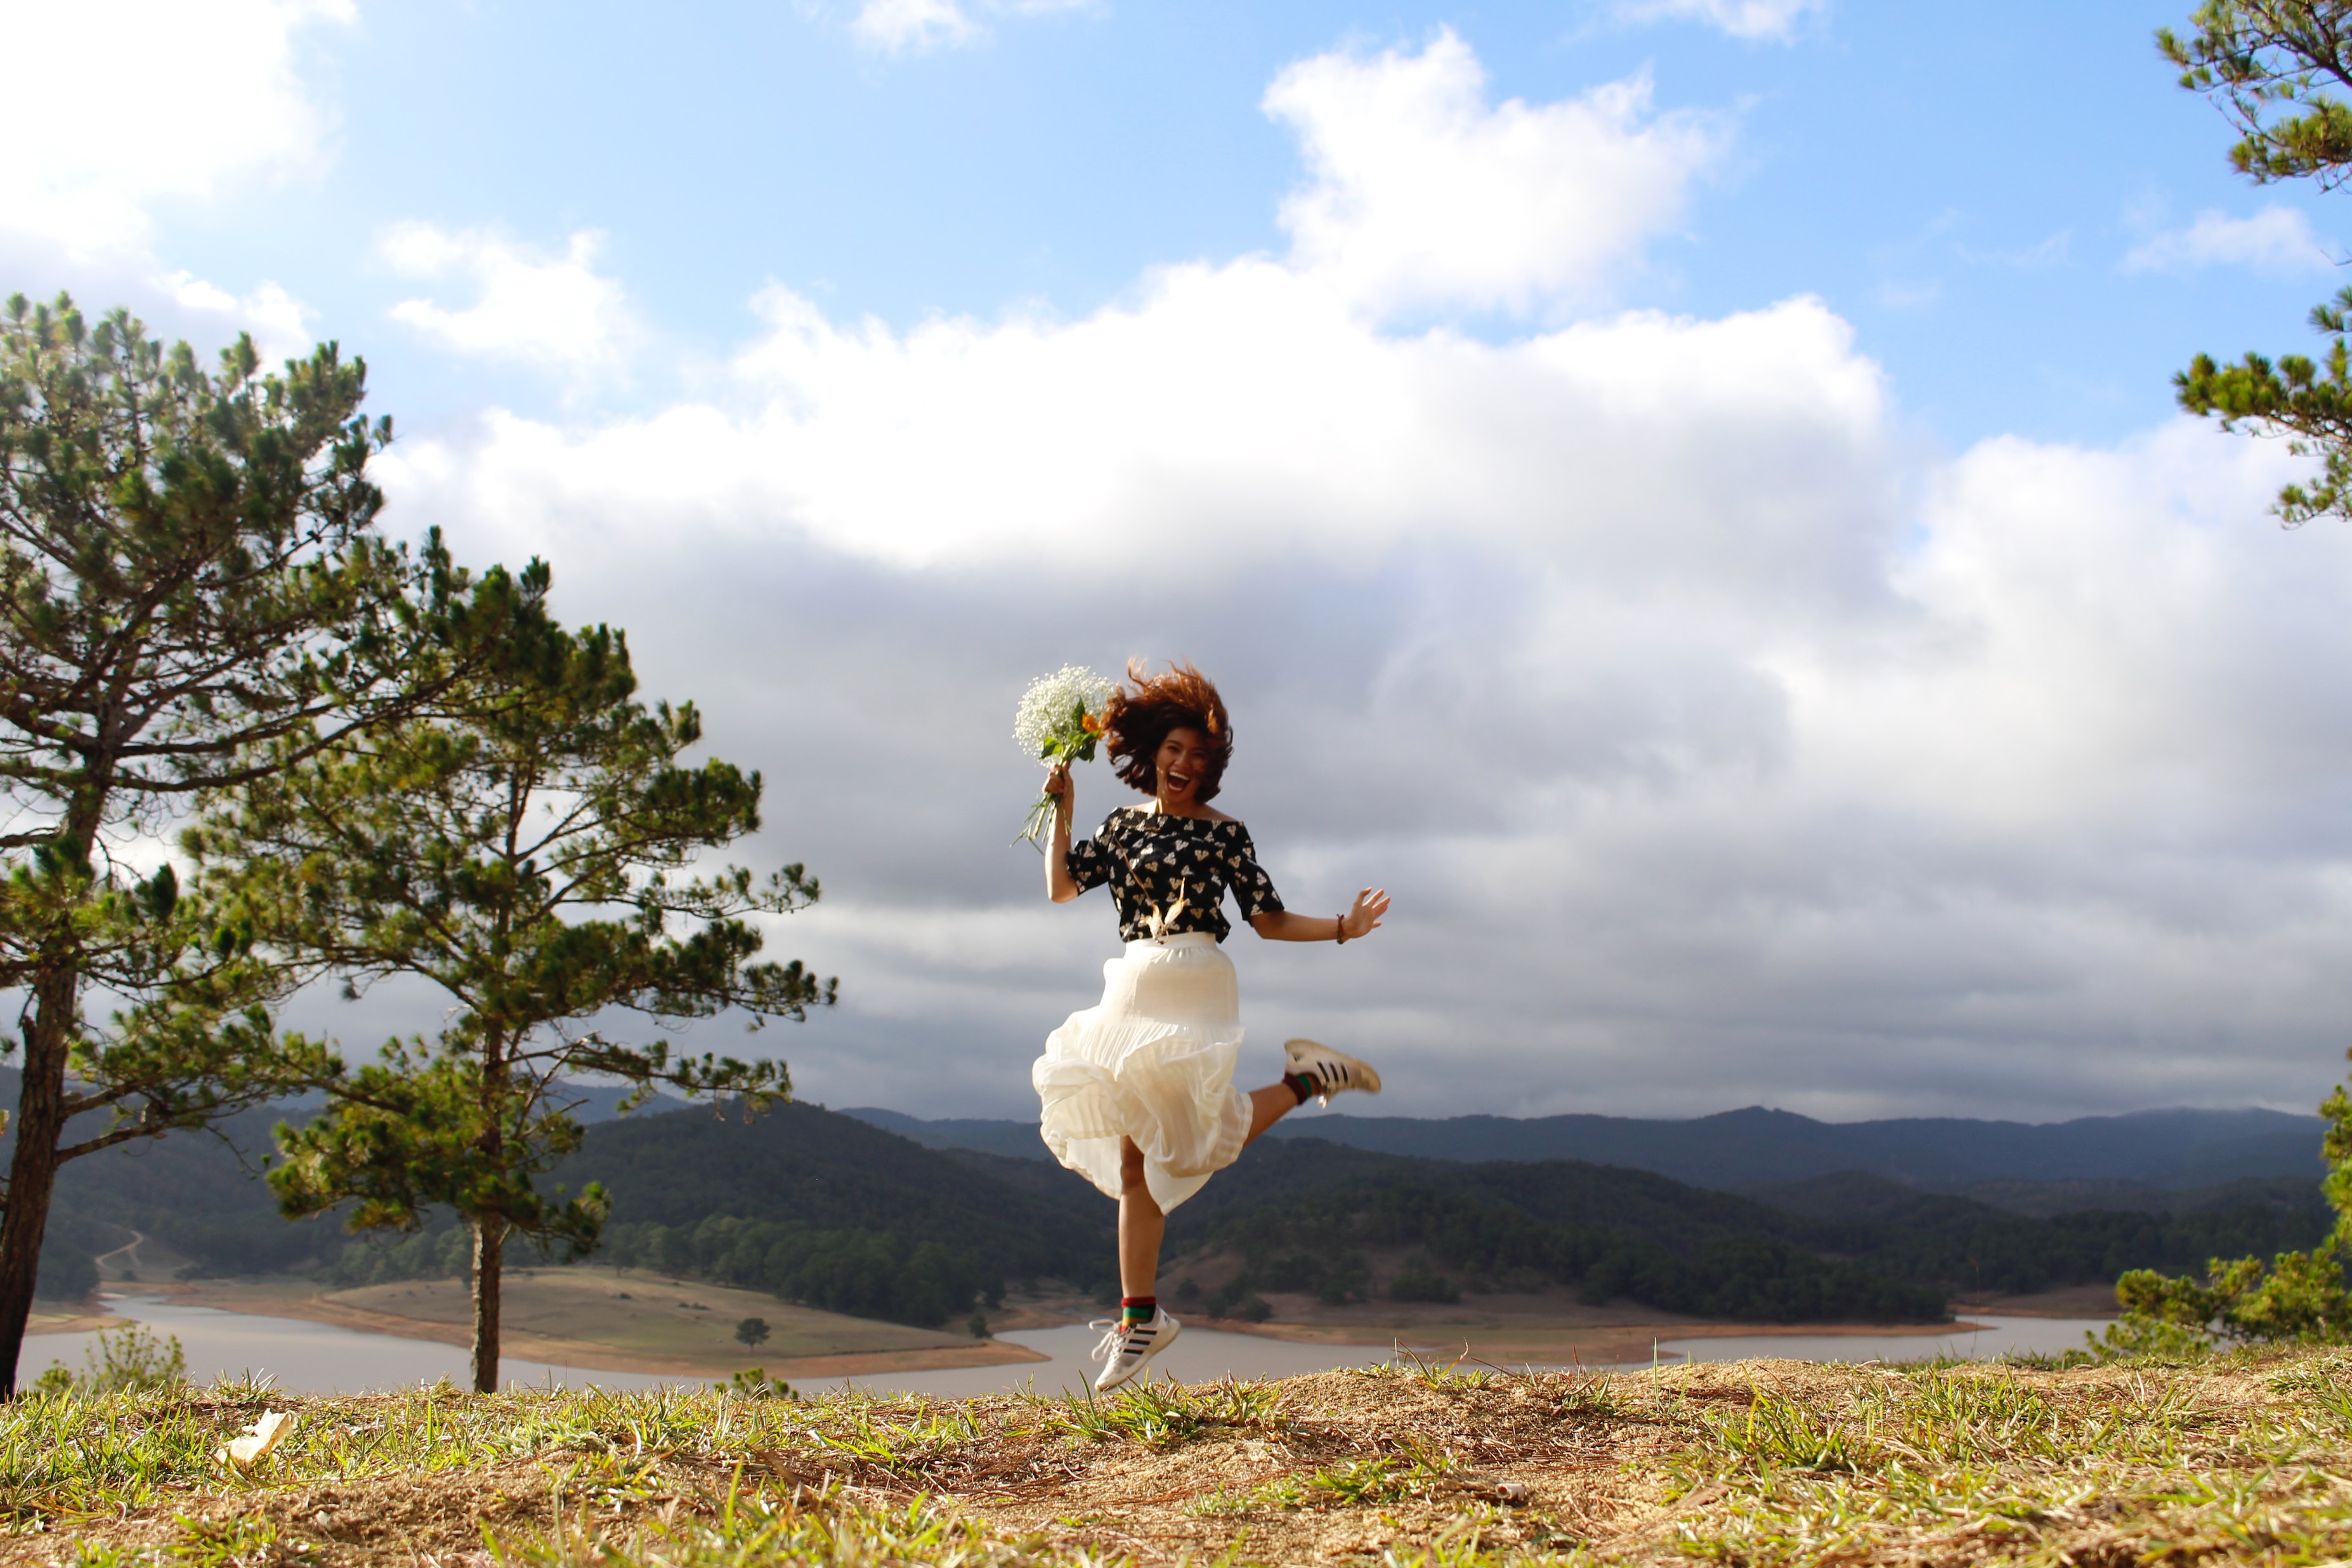 Happy woman jumping in nature. | Source: Pexels